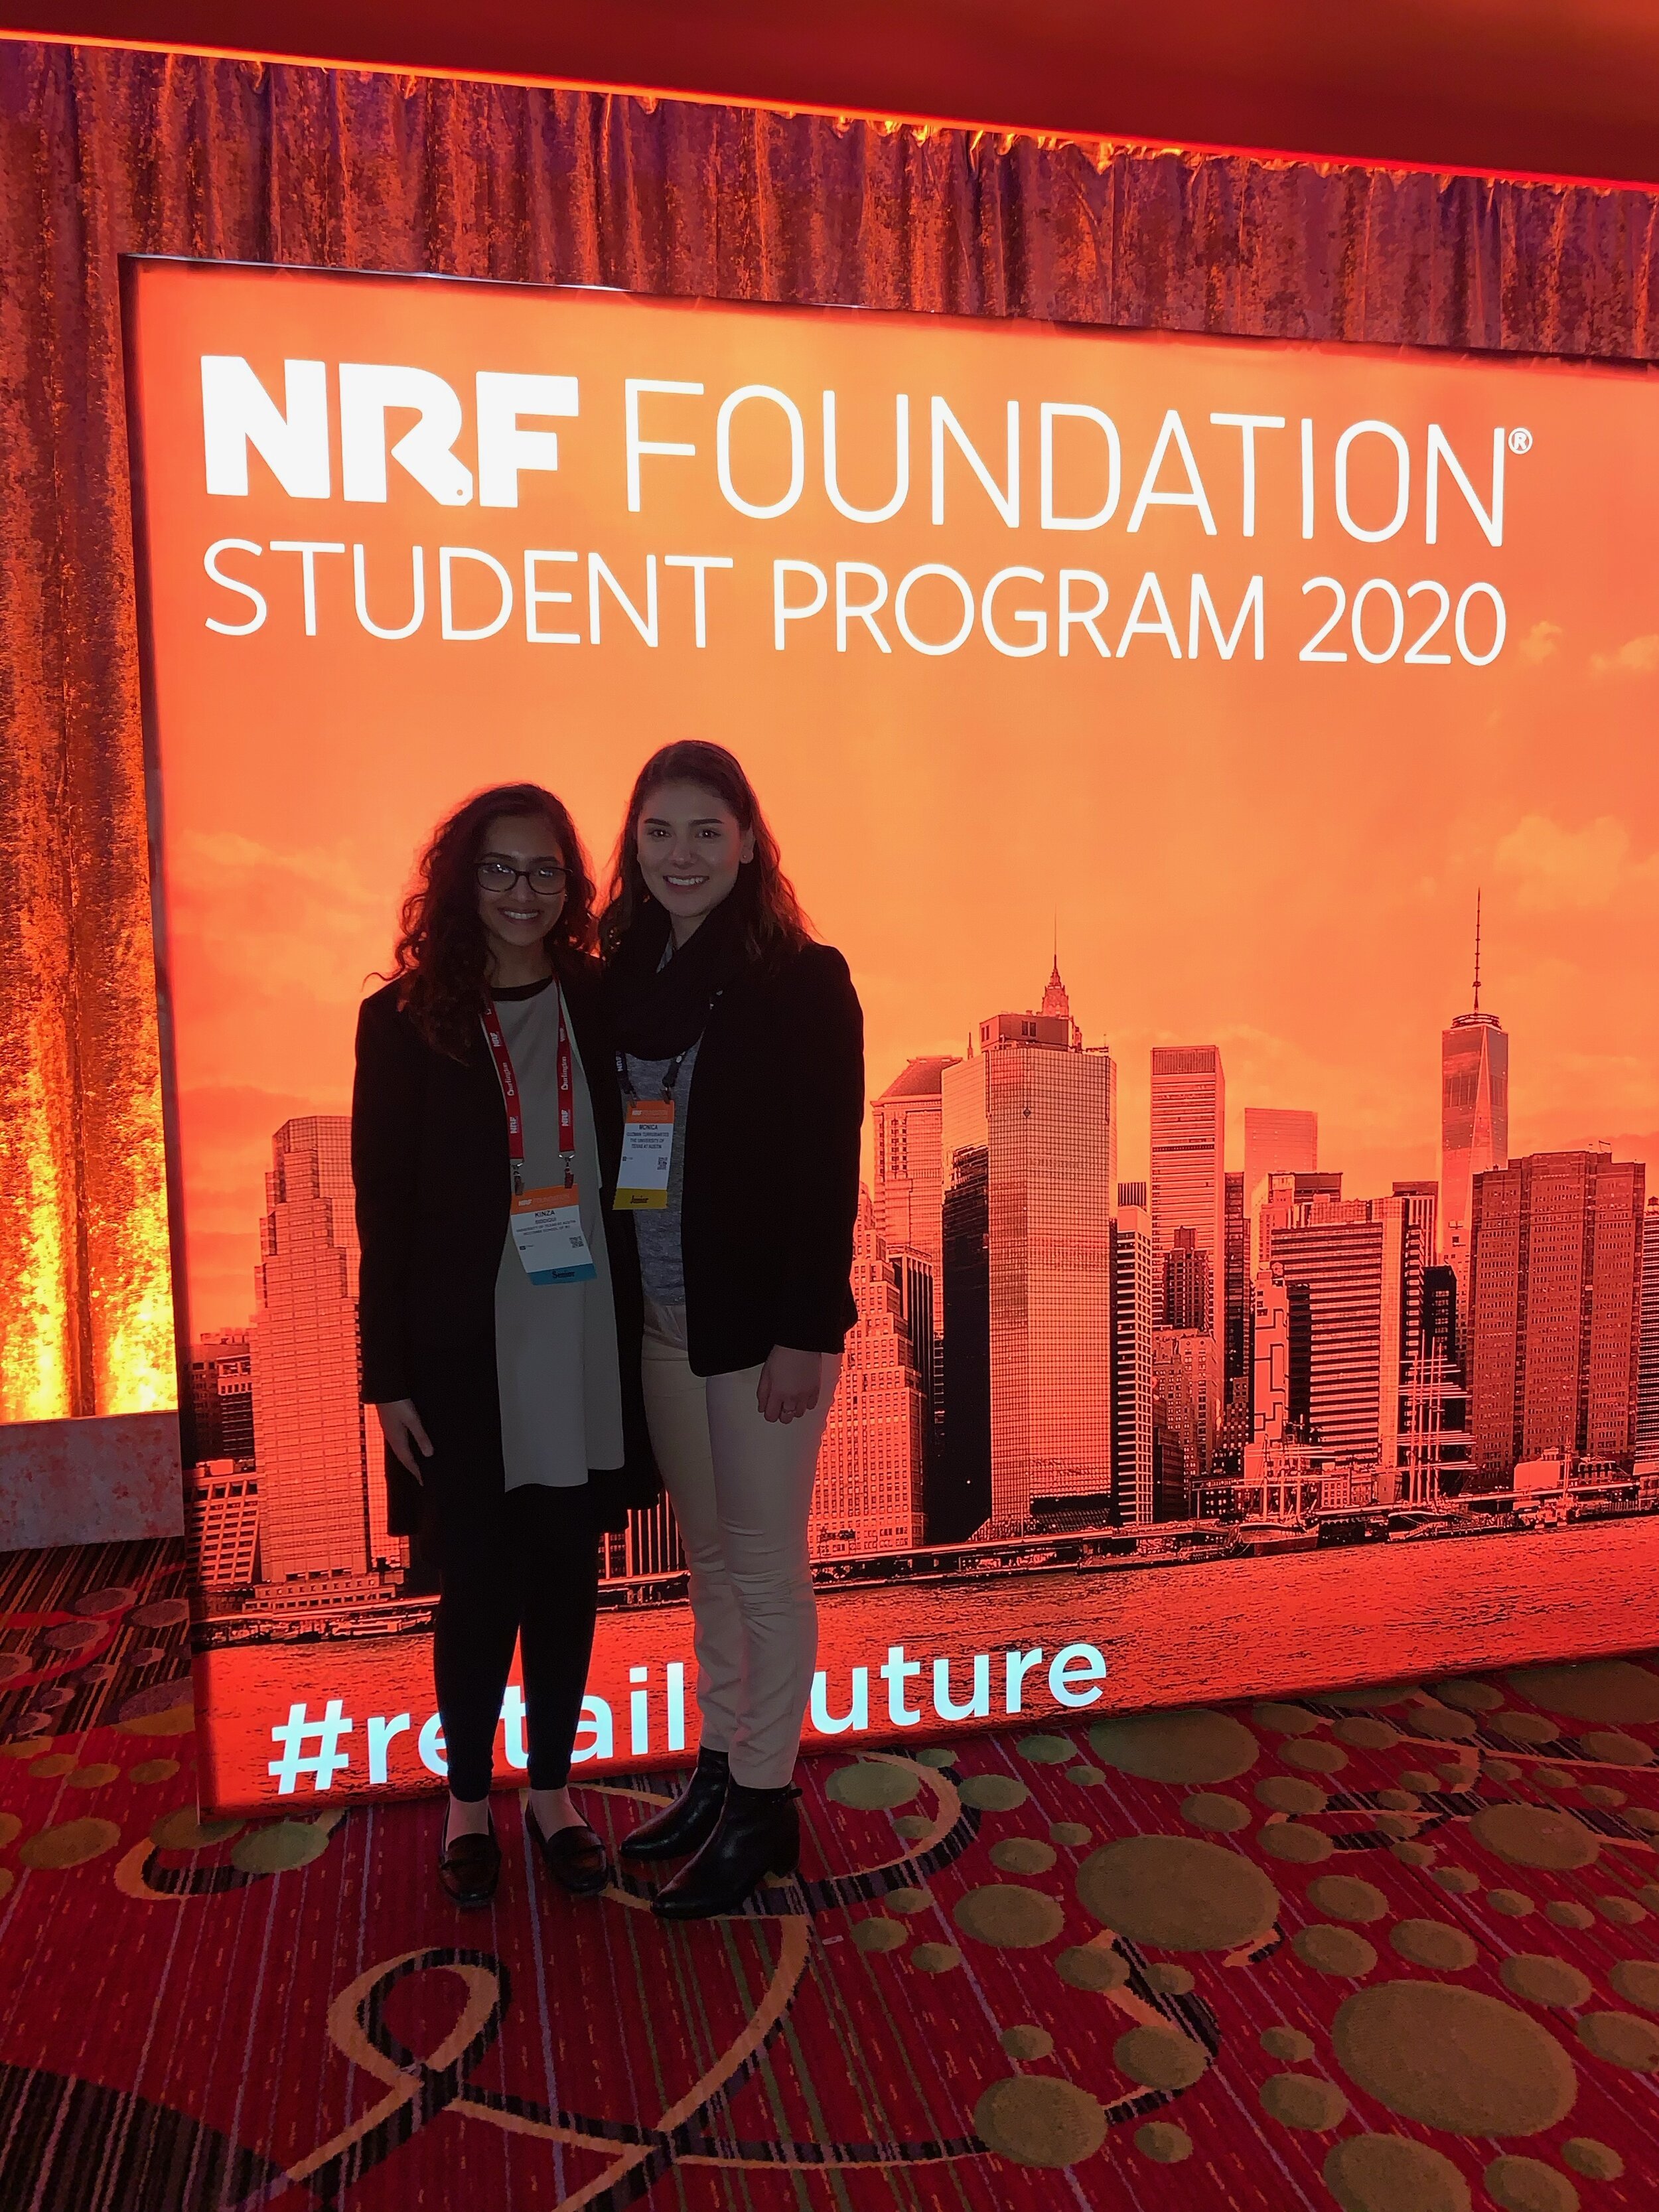 SCMSO Members at the NRF Foundation Student Program 2020